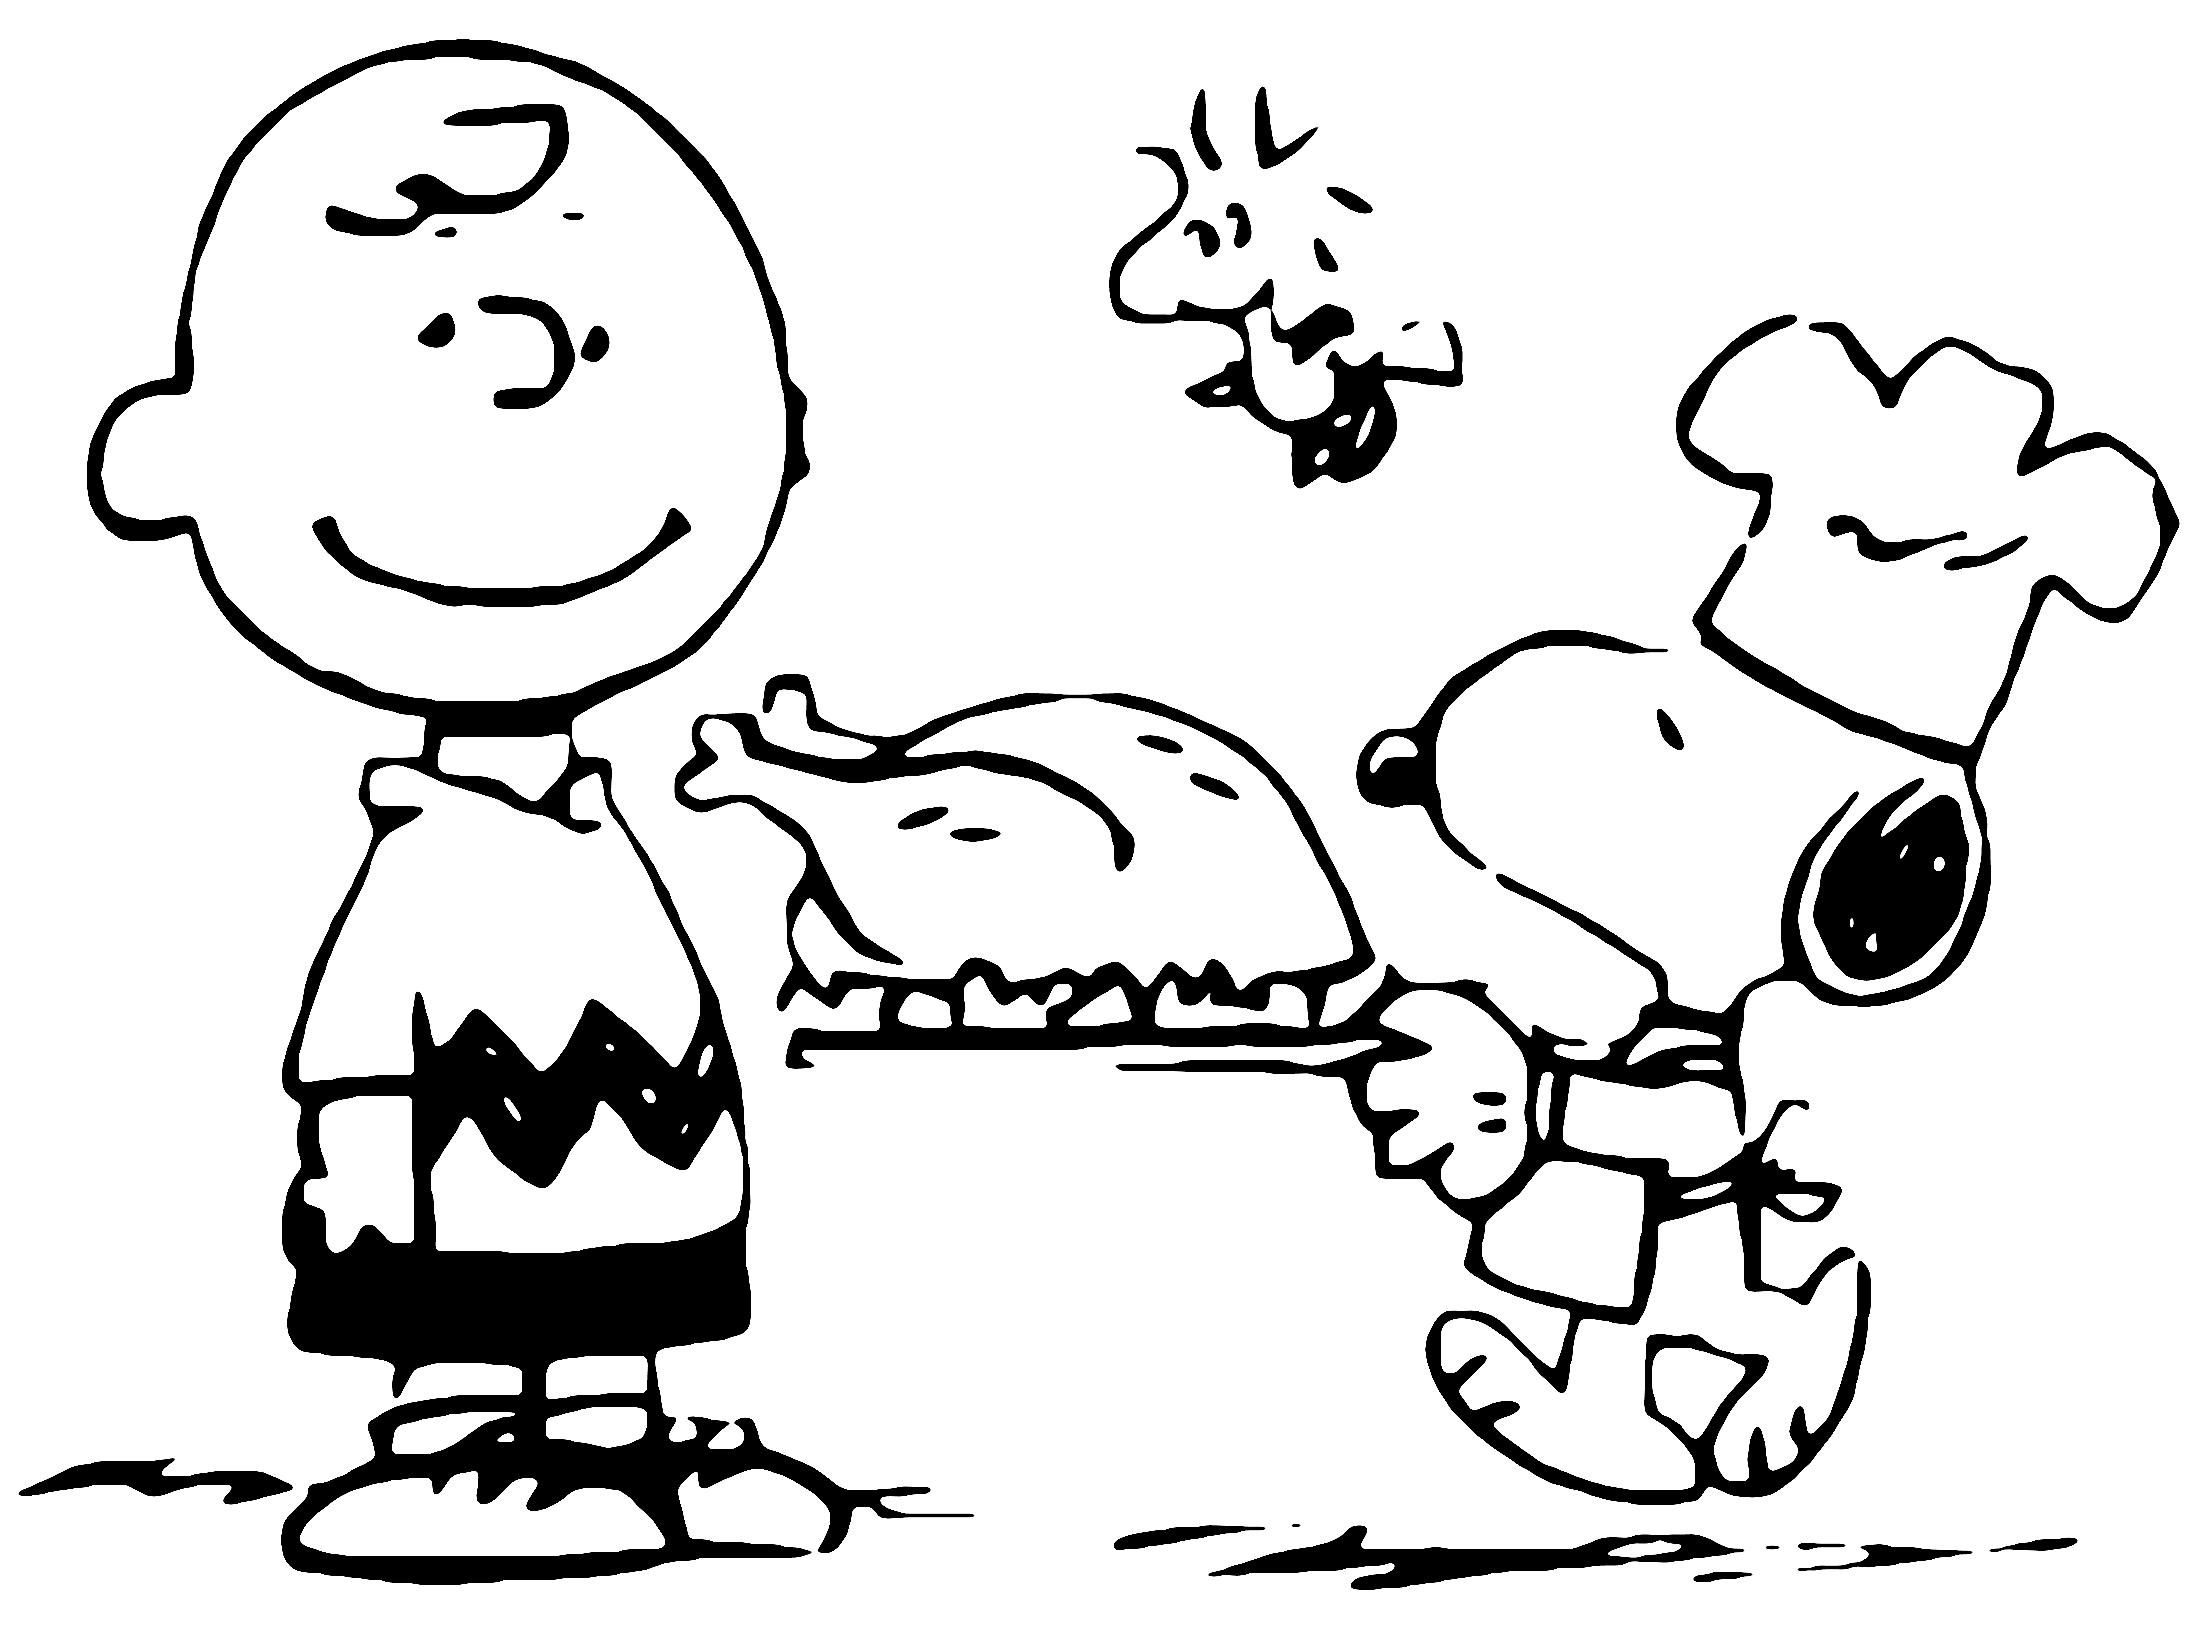 Printable Coloring Page of Charlie Brown and Snoopy Dog with Thanksgiving Feast